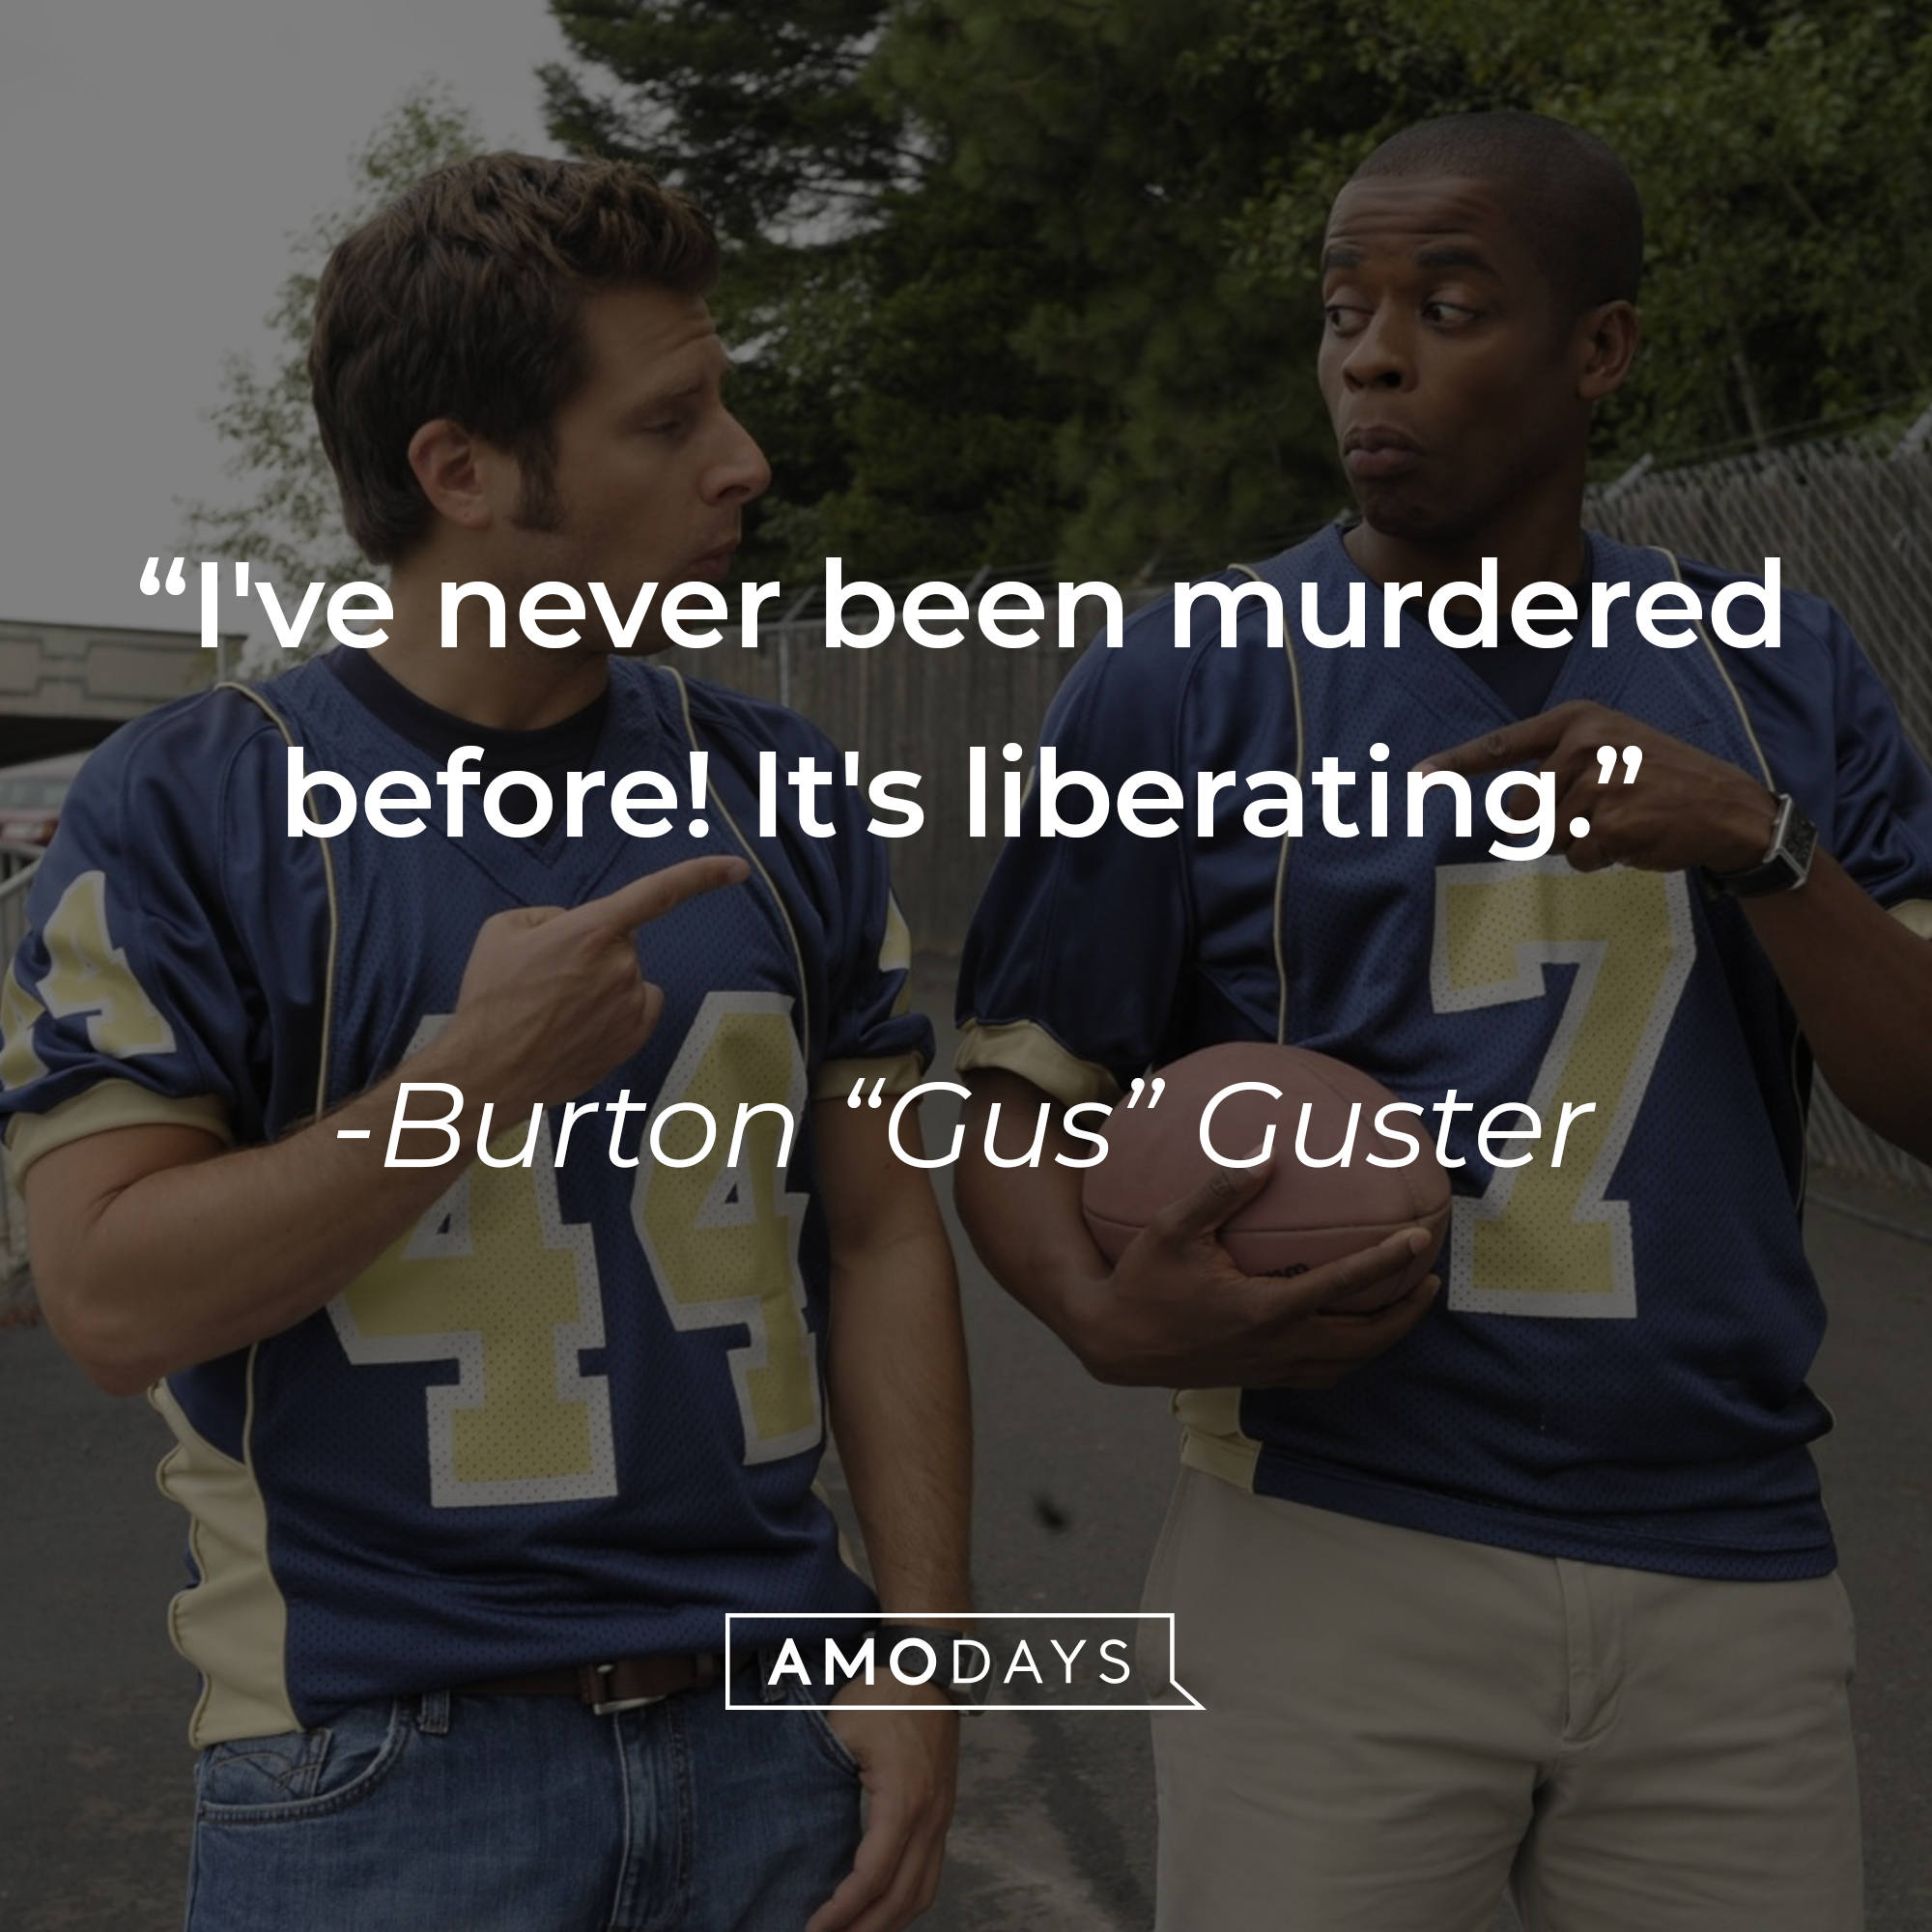 Shawn Spencer and Burton “Gus” Guster, withGuster’s quote: “I've never been murdered before! It's liberating.”   | Source: facebook.com/PsychPeacock